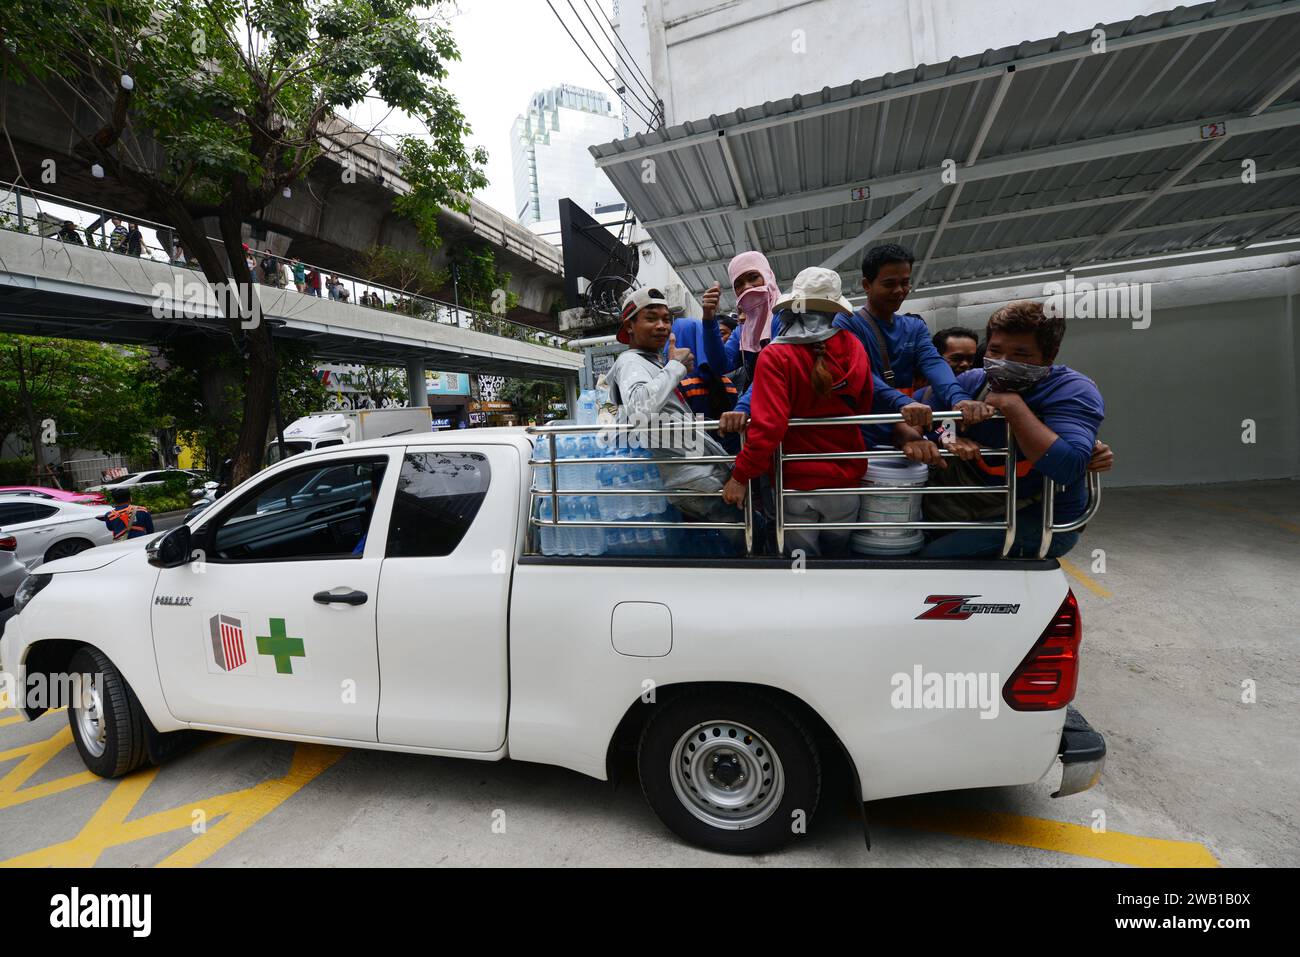 A Pickup truck fully loaded with people riding in the rear in Bangkok, Thailand. Stock Photo